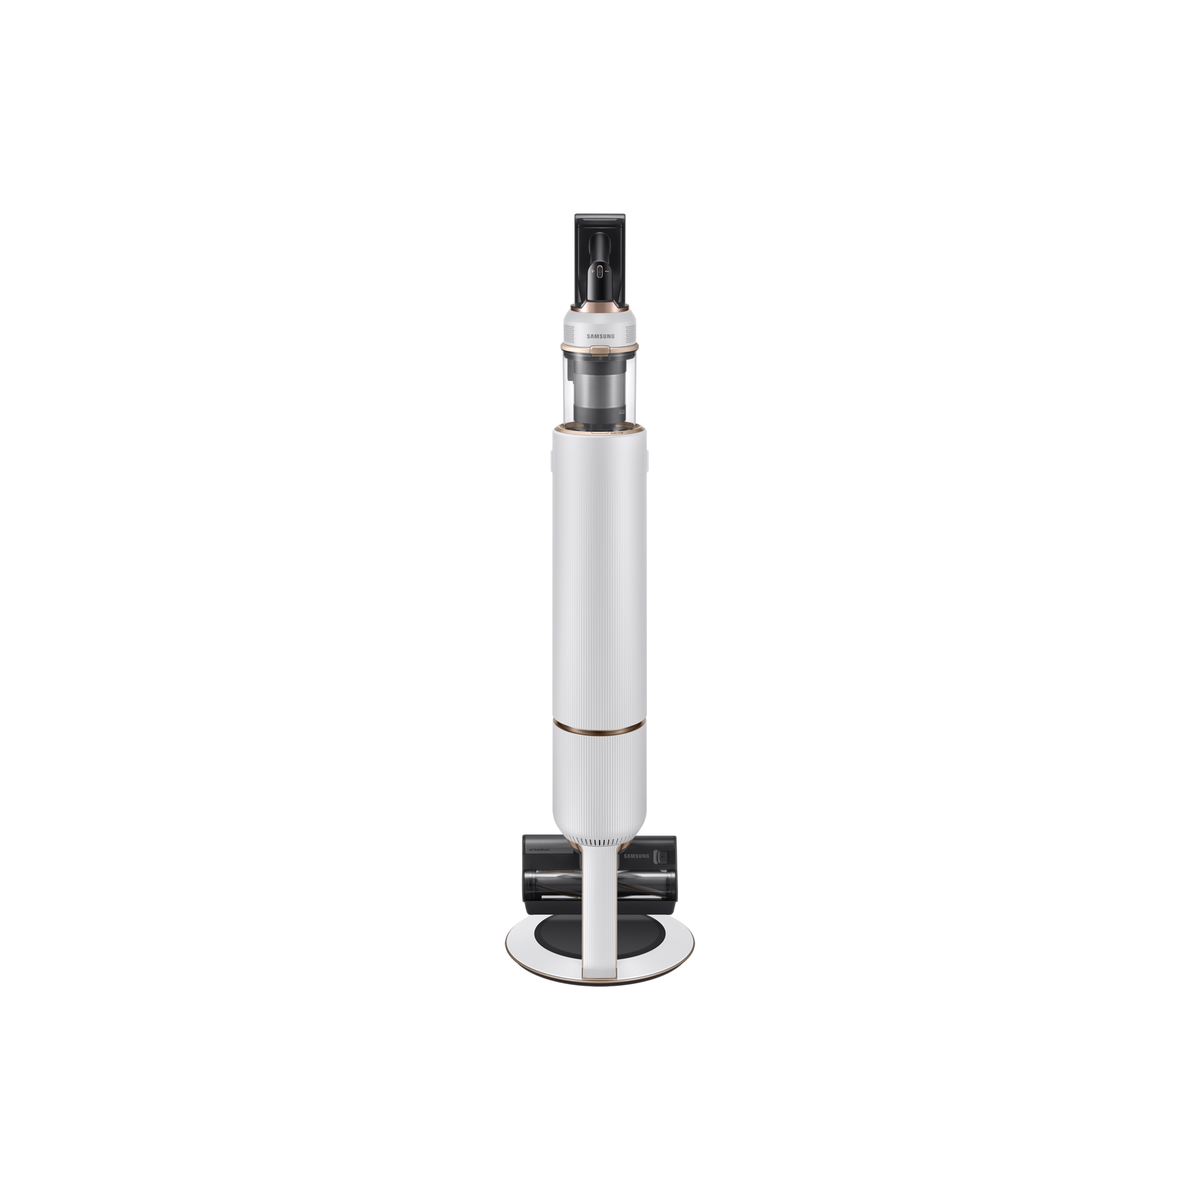 Samsung Bespoke Jet Plus Pet Cordless Stick Vacuum Cleaner - White | VS20B95823W/E from Samsung - DID Electrical